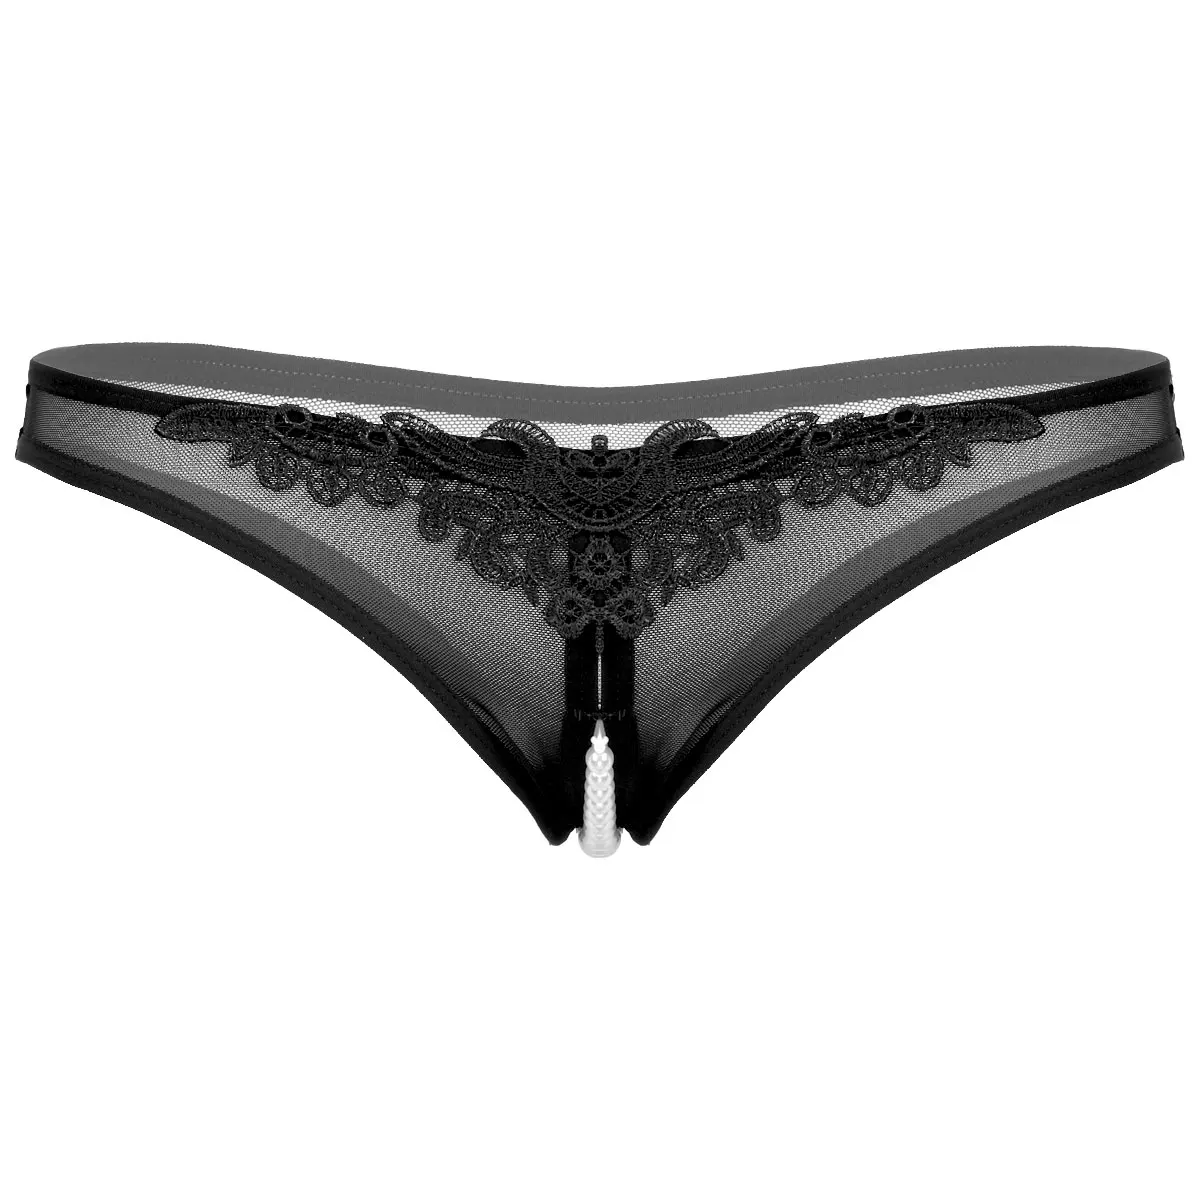 Women Sexy Lingerie Erotic Panties Low Rise Open Crotch Porn See Through Sheer Mesh Underwear Crotchless Briefs Couple Sex Wear